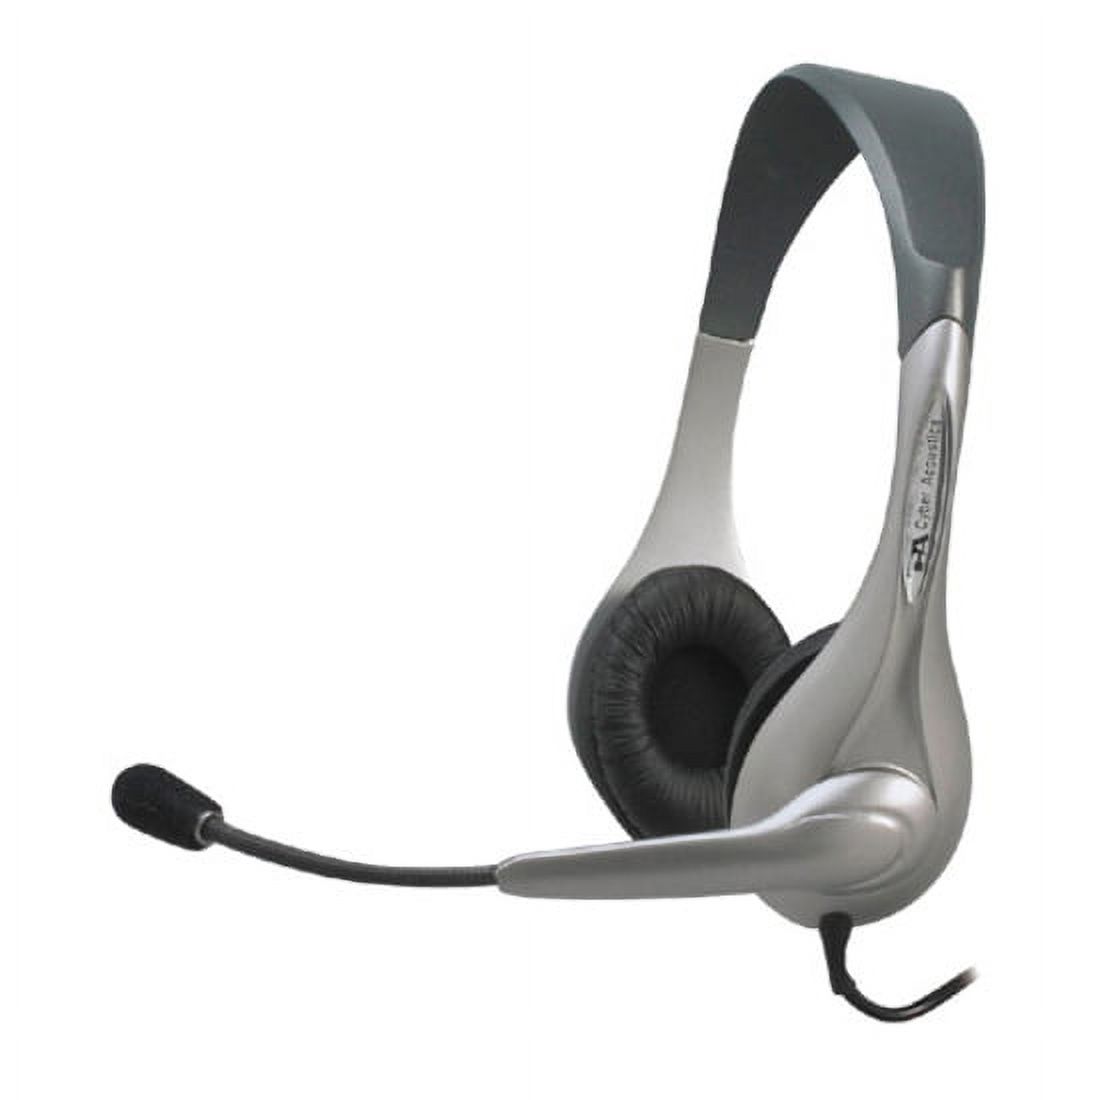 Cyber Acoustics AC-202b Speech Recognition Stereo Headset - image 1 of 3